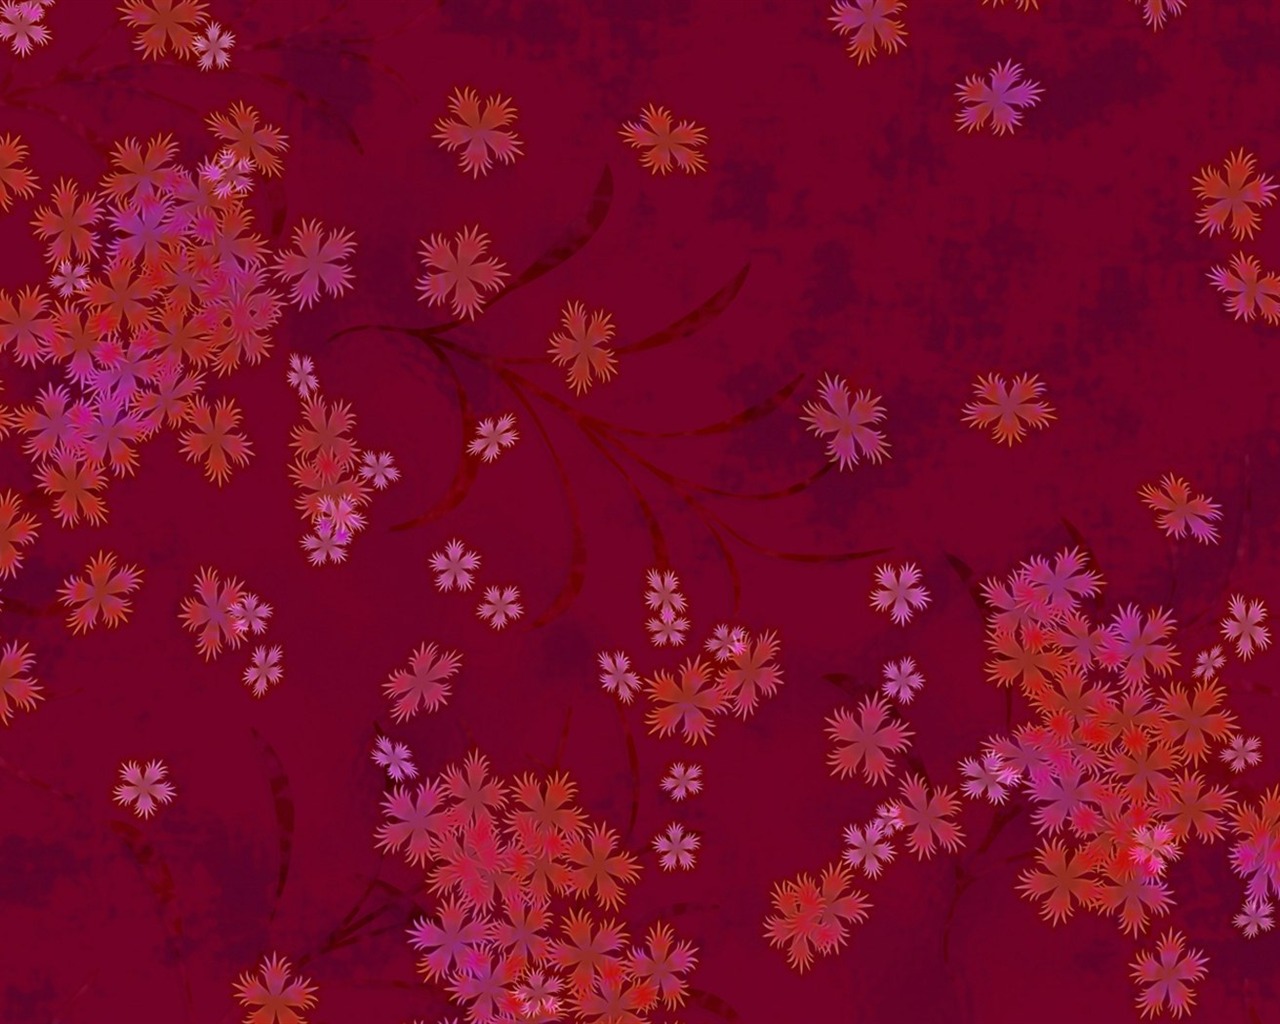 Japan style wallpaper pattern and color #19 - 1280x1024